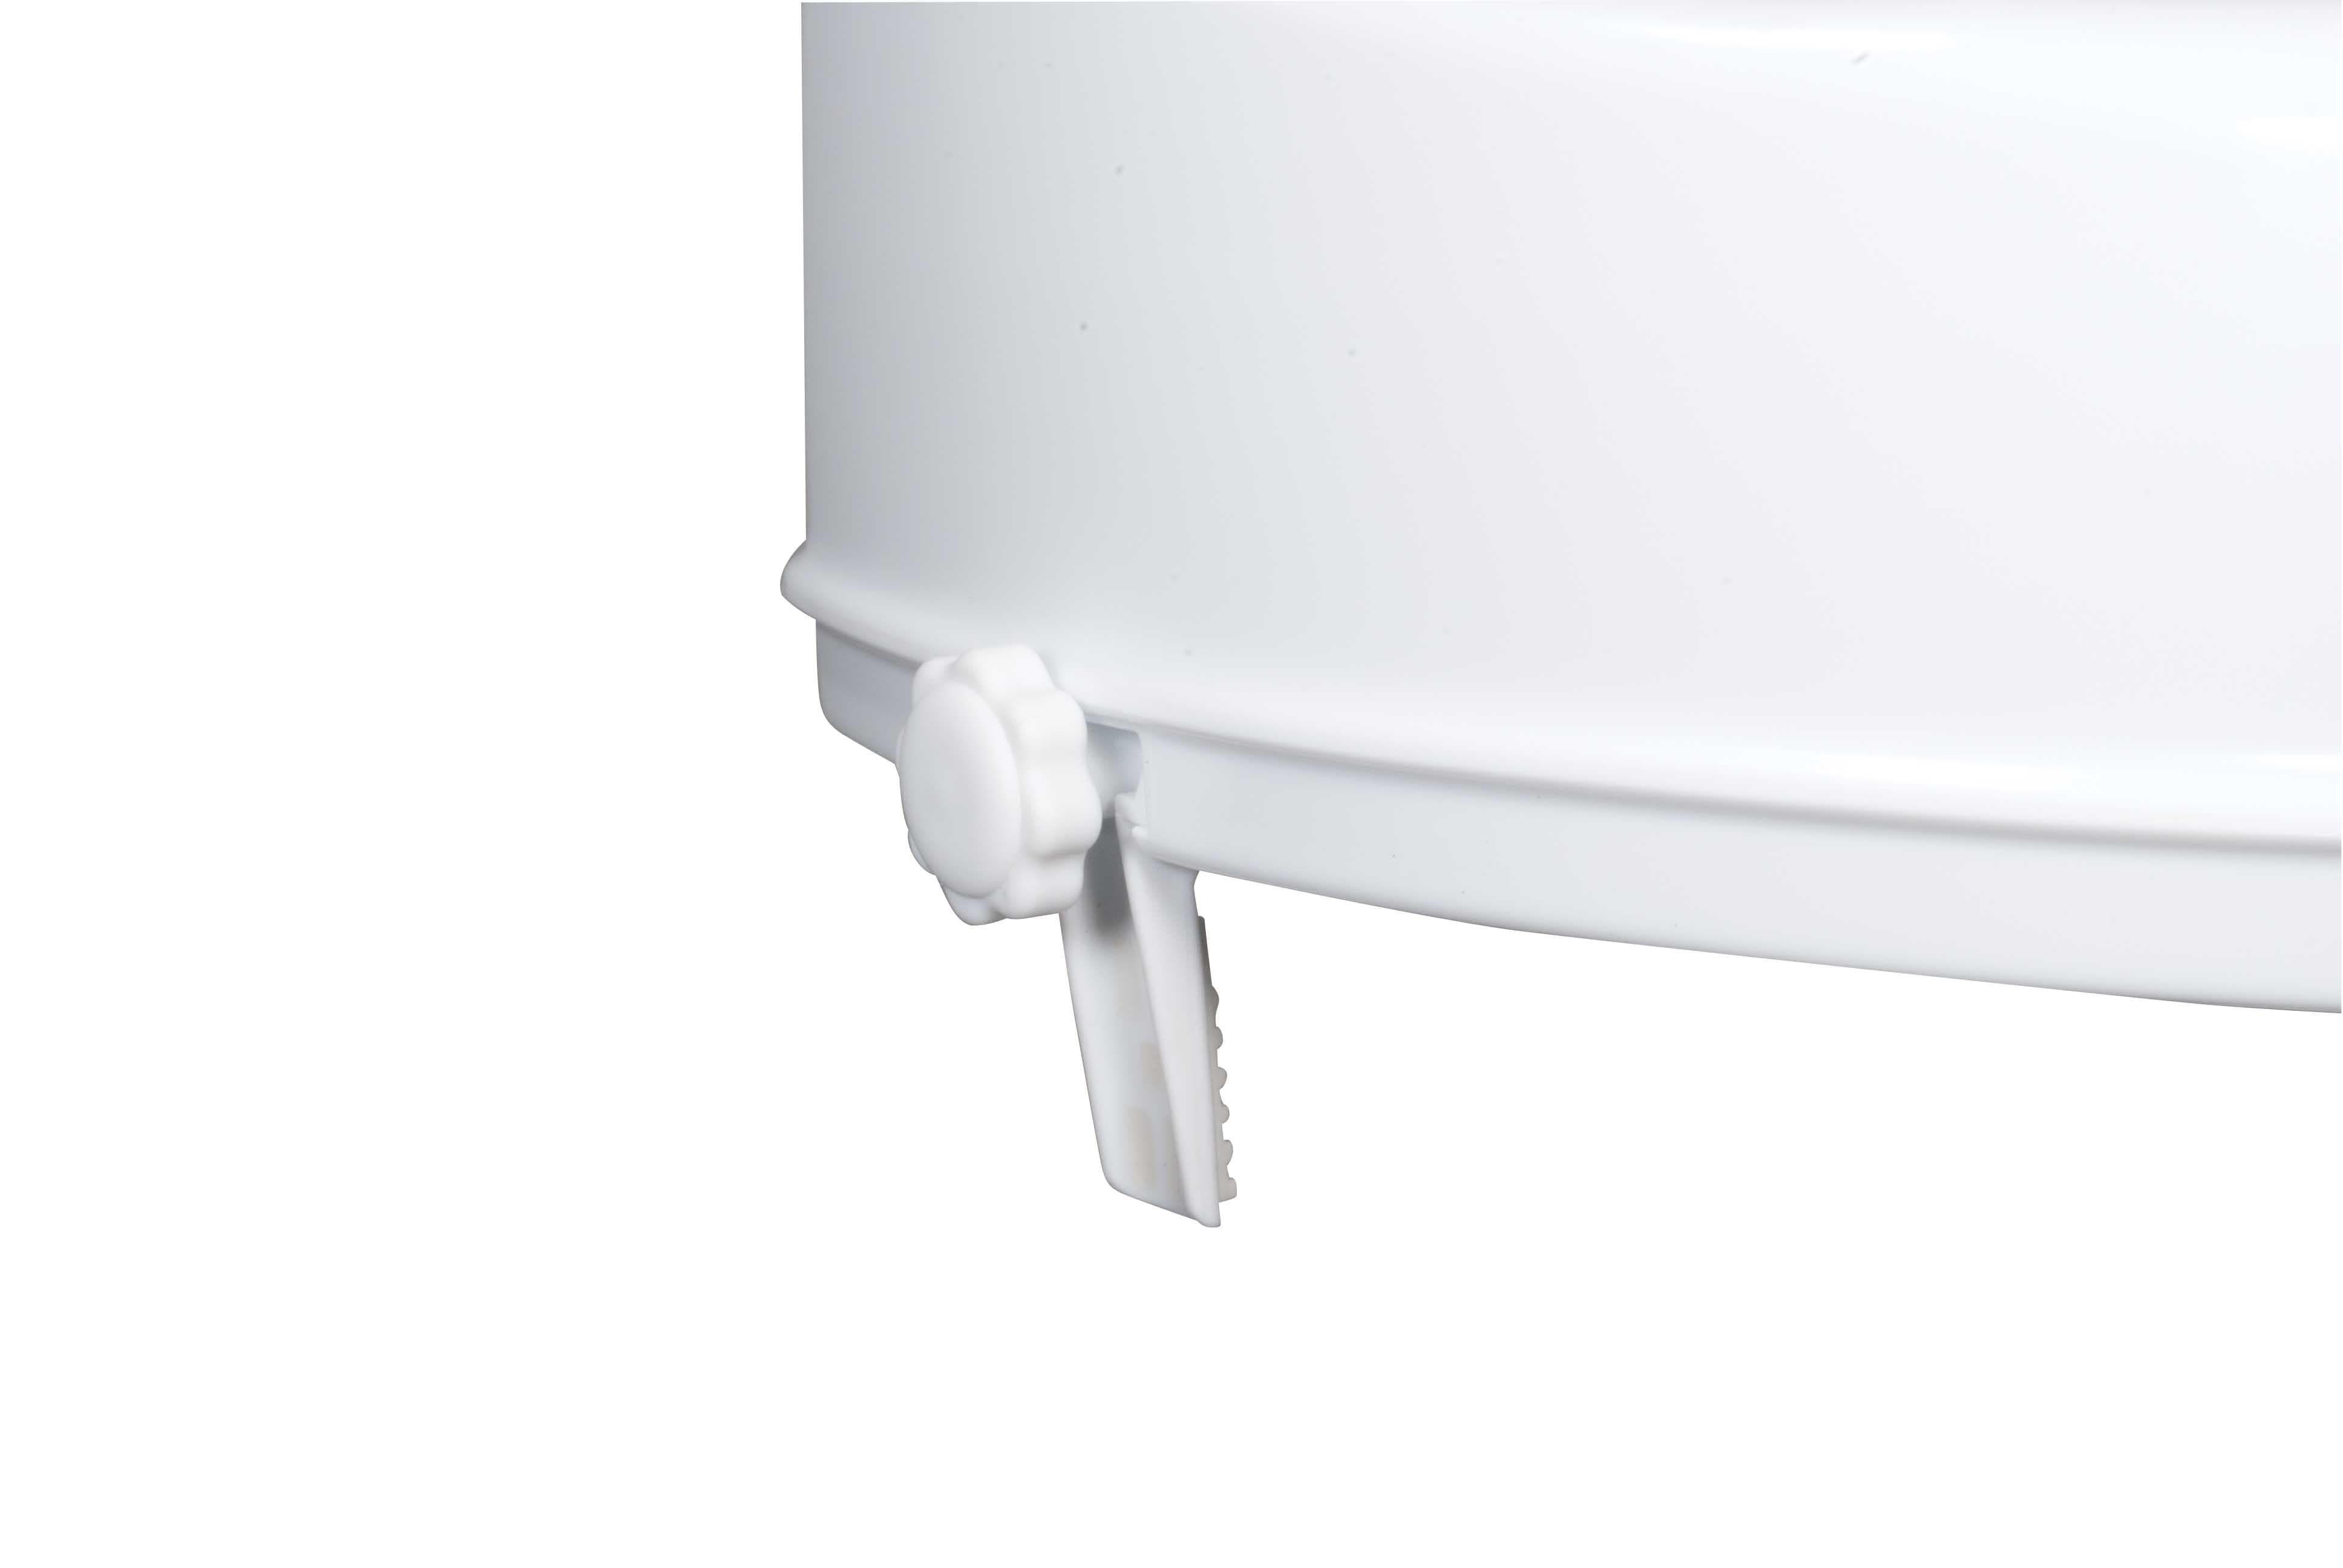 Drive Medical Bathroom Safety Drive Medical Raised Toilet Seat with Lock and Lid, Standard Seat